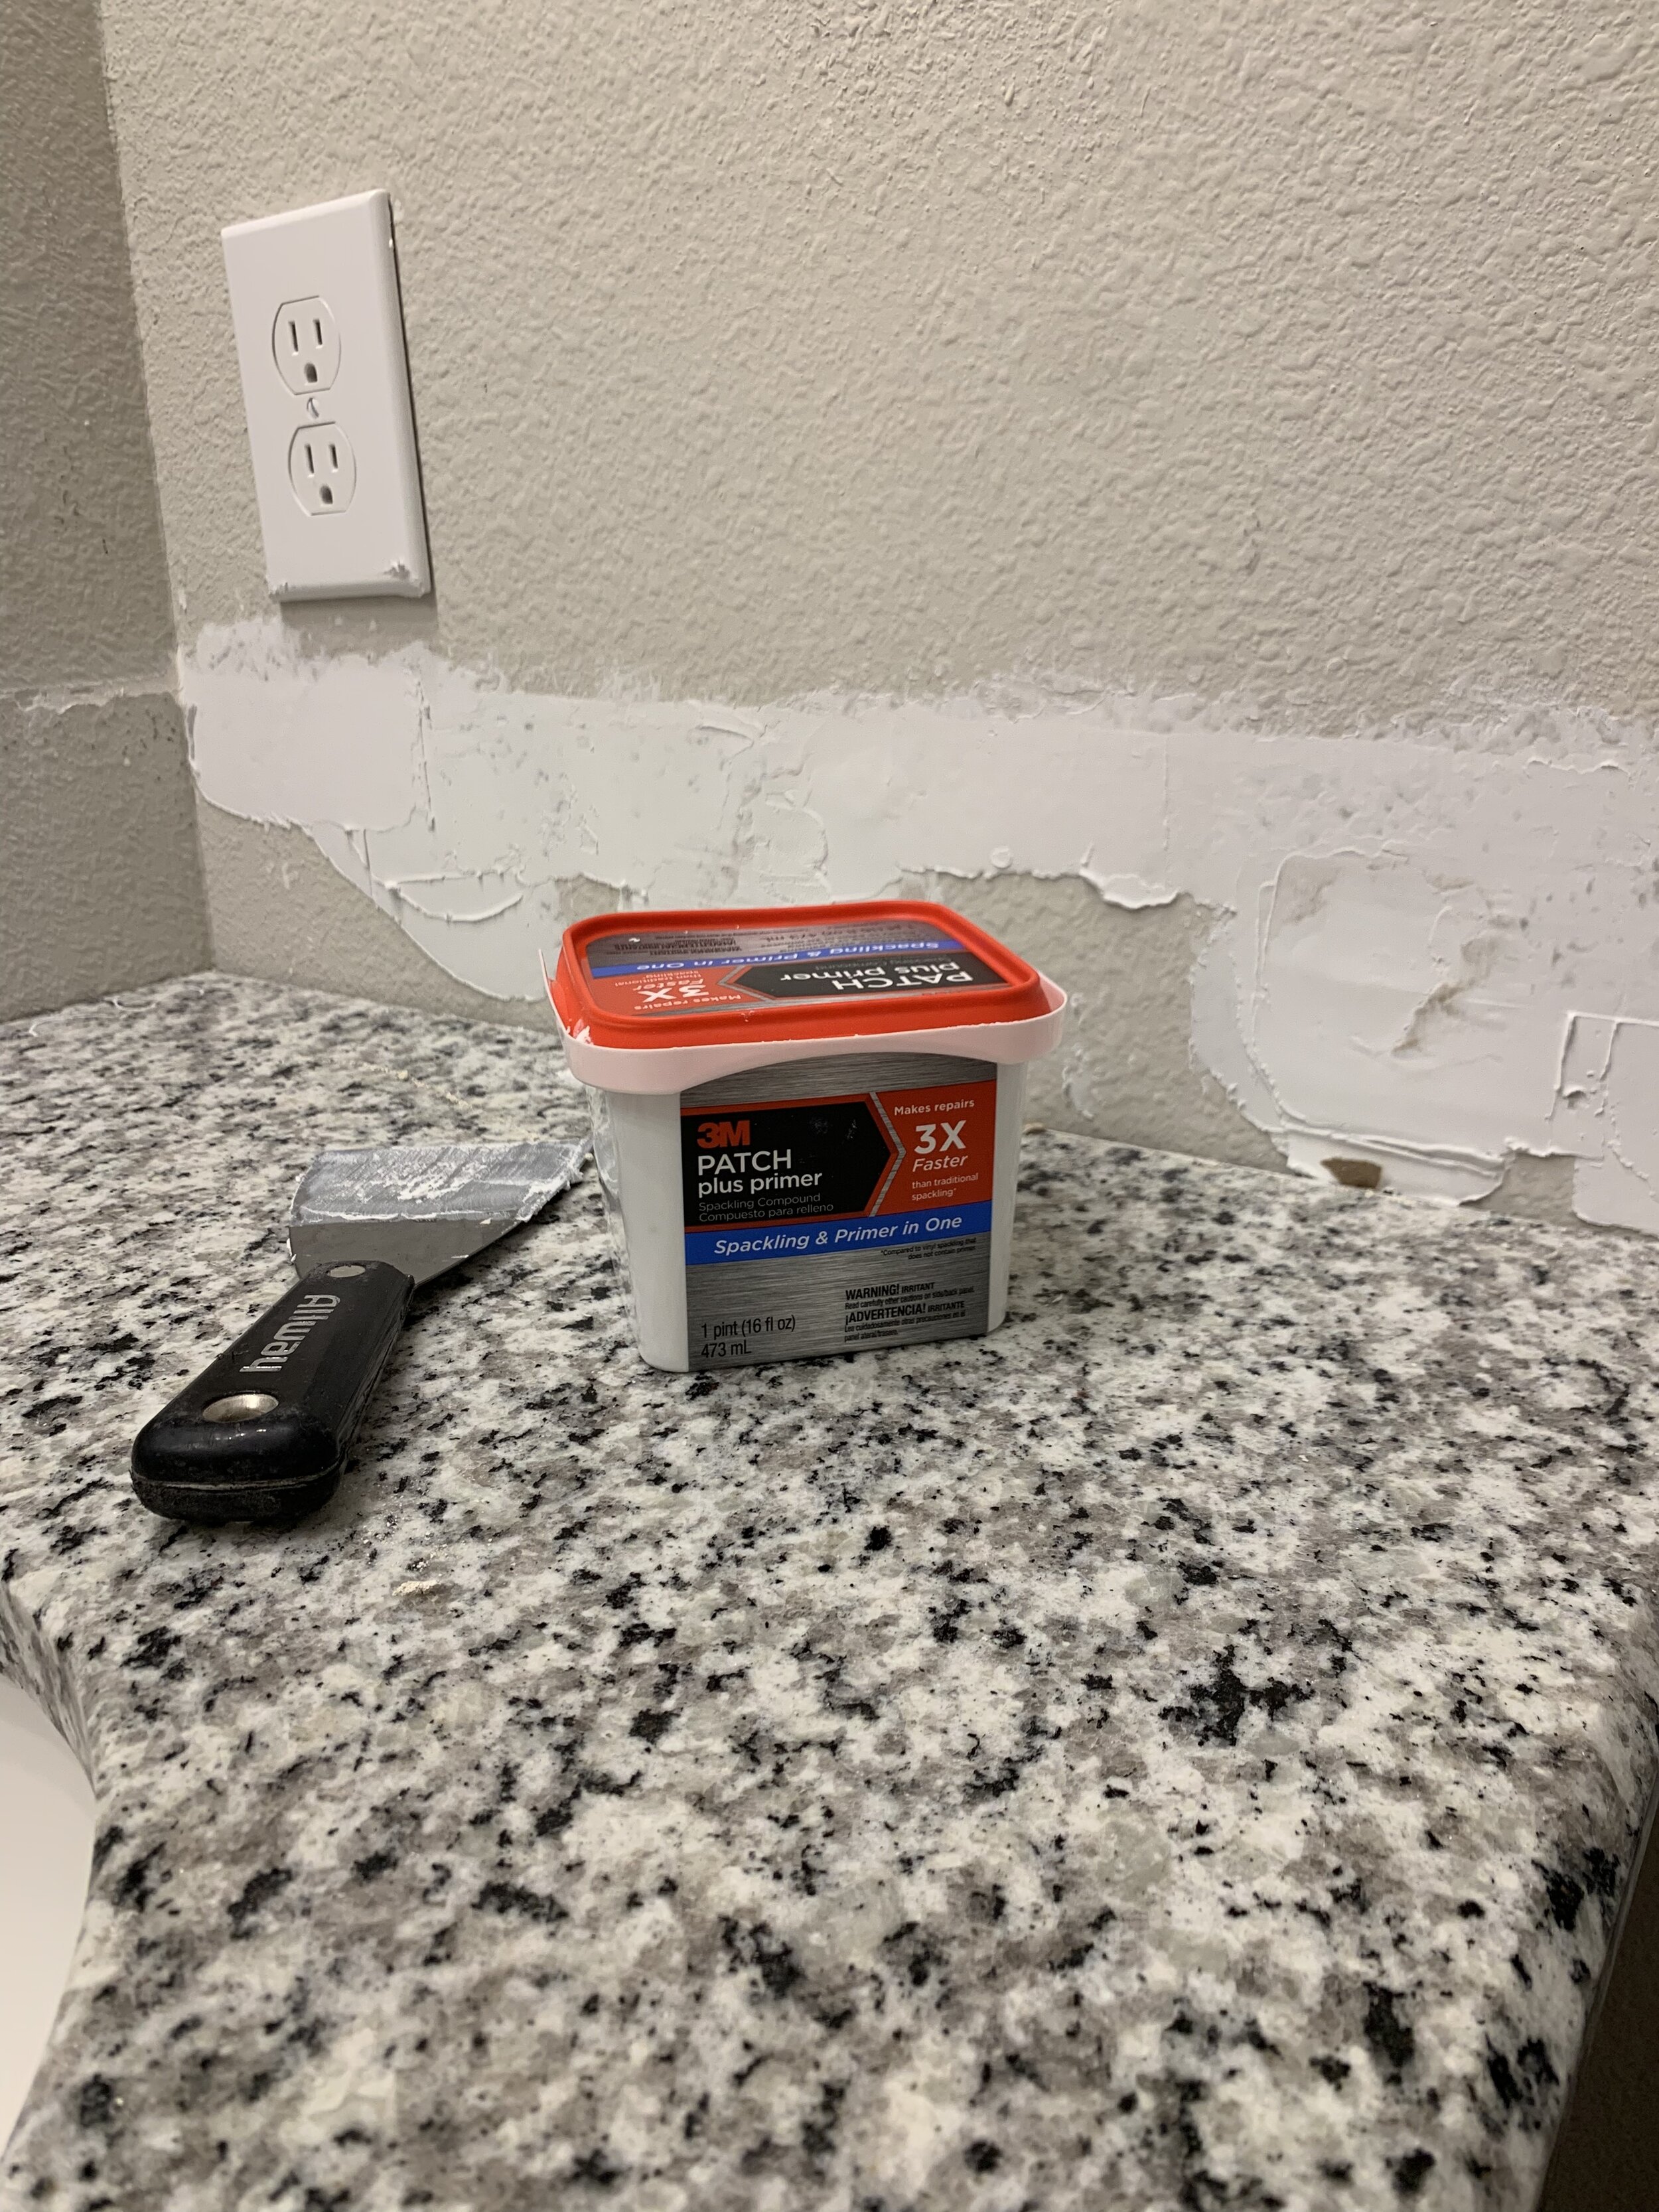 10/10 reccoment this patch and primer spackle